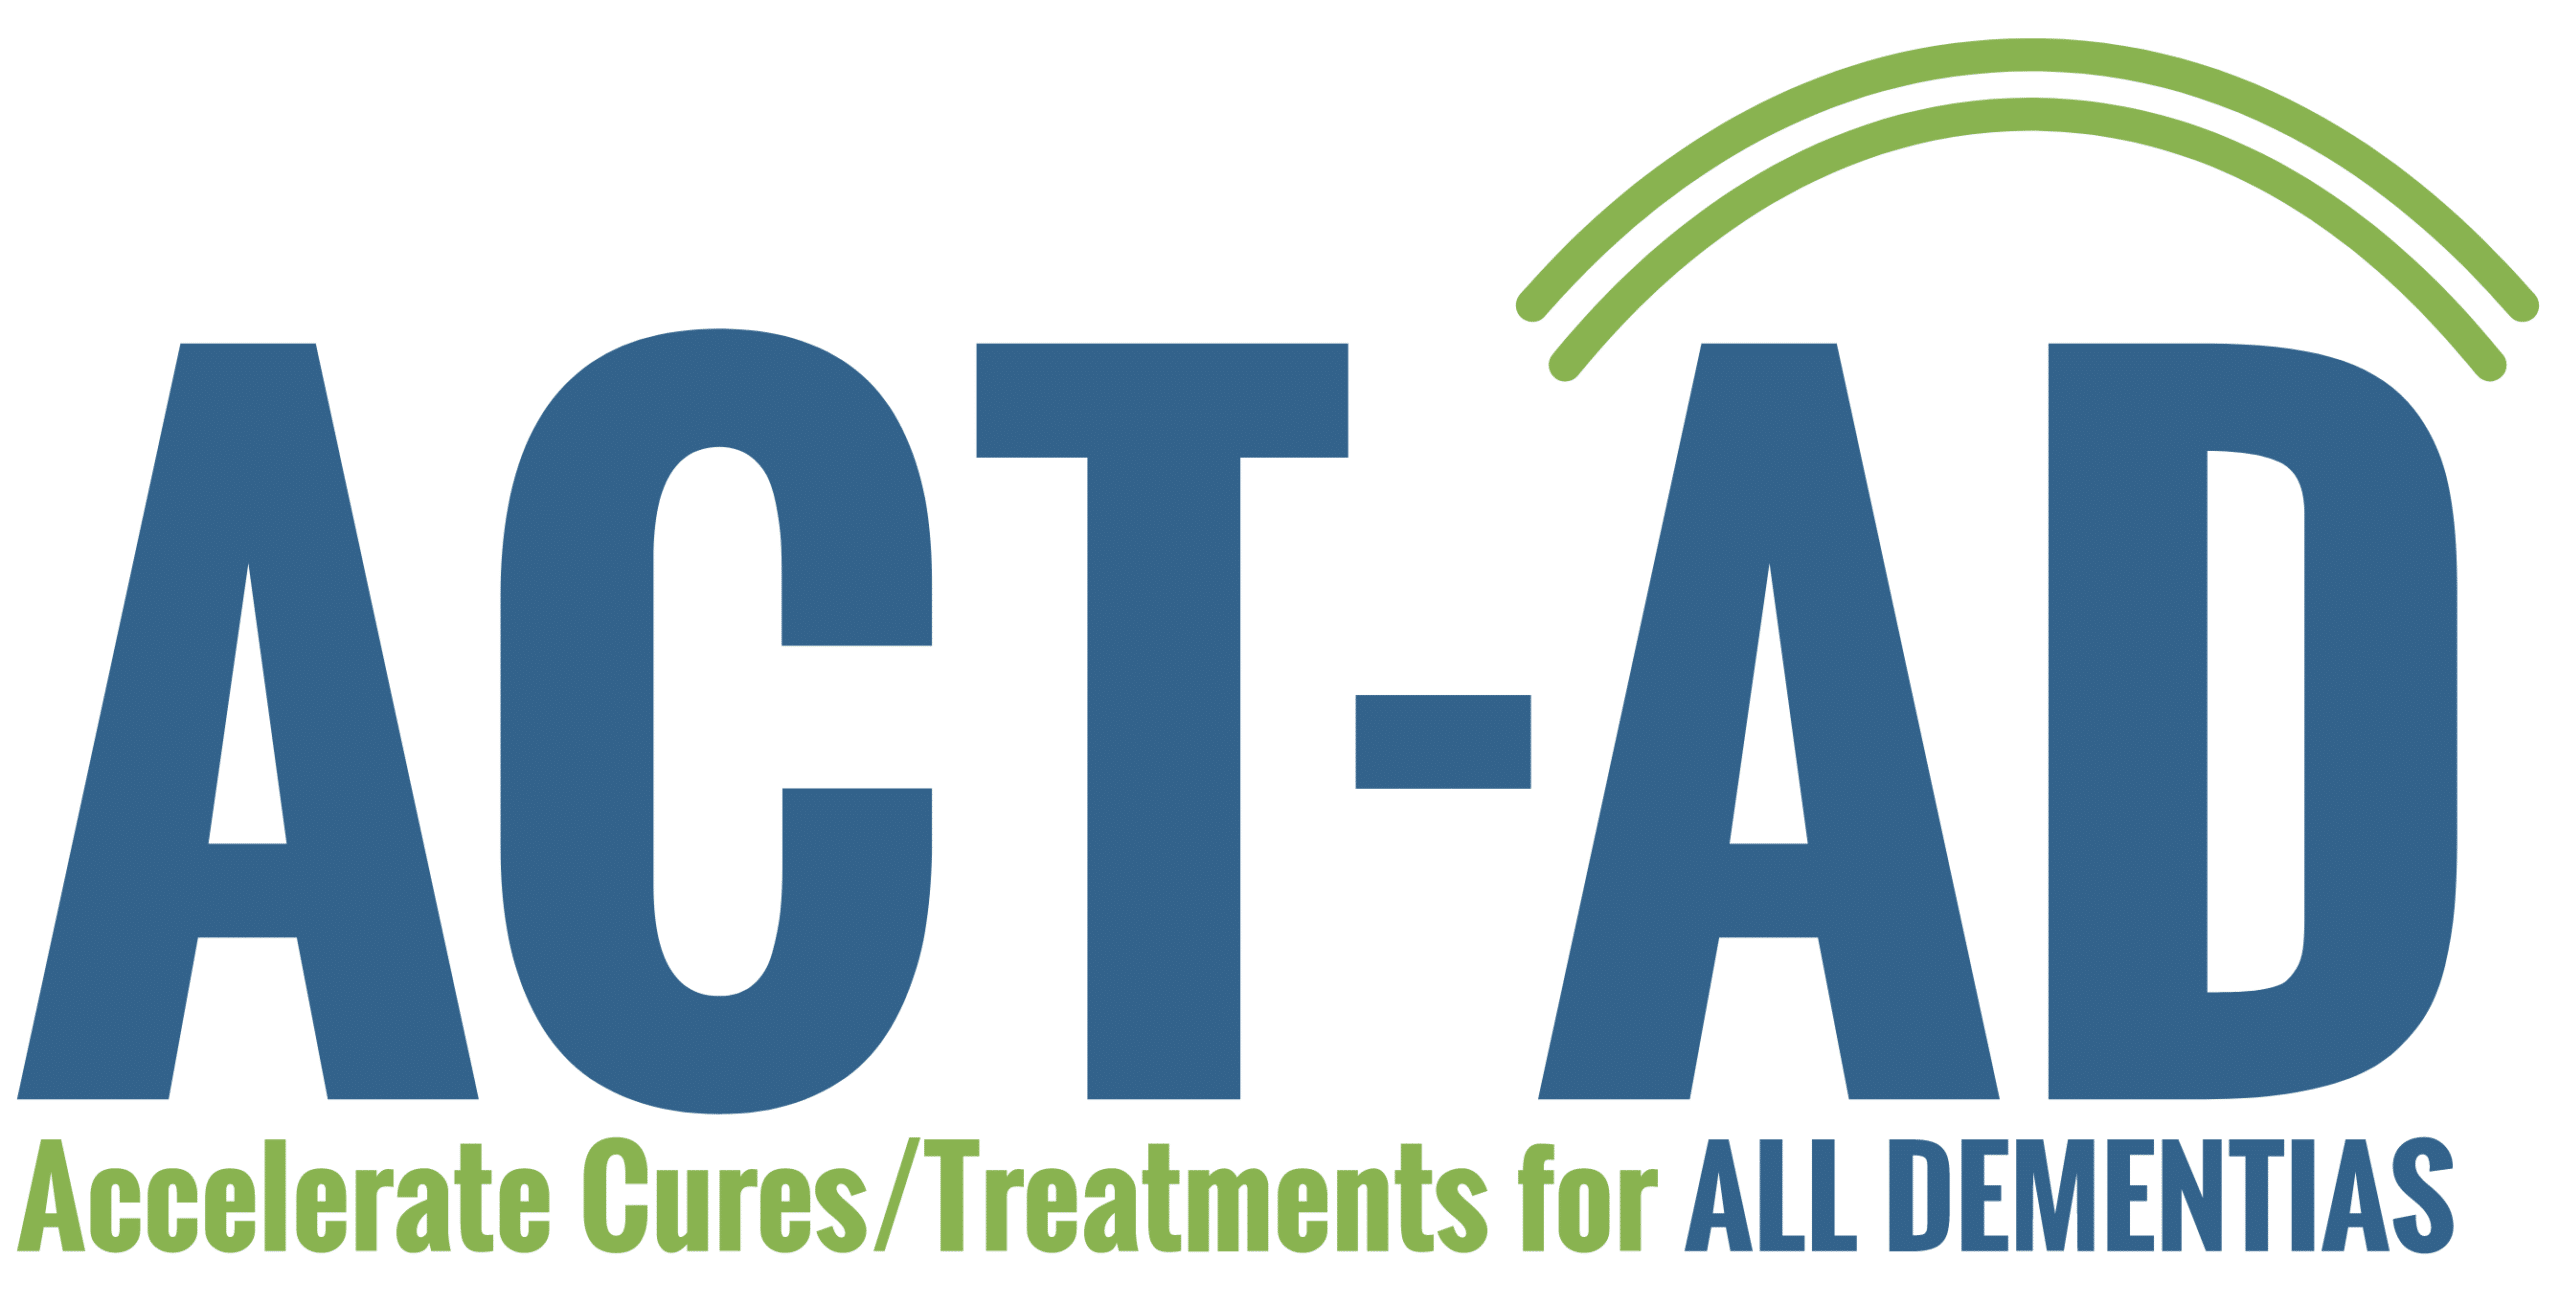 Accelerate Cures Treatments for All Dementias logo.